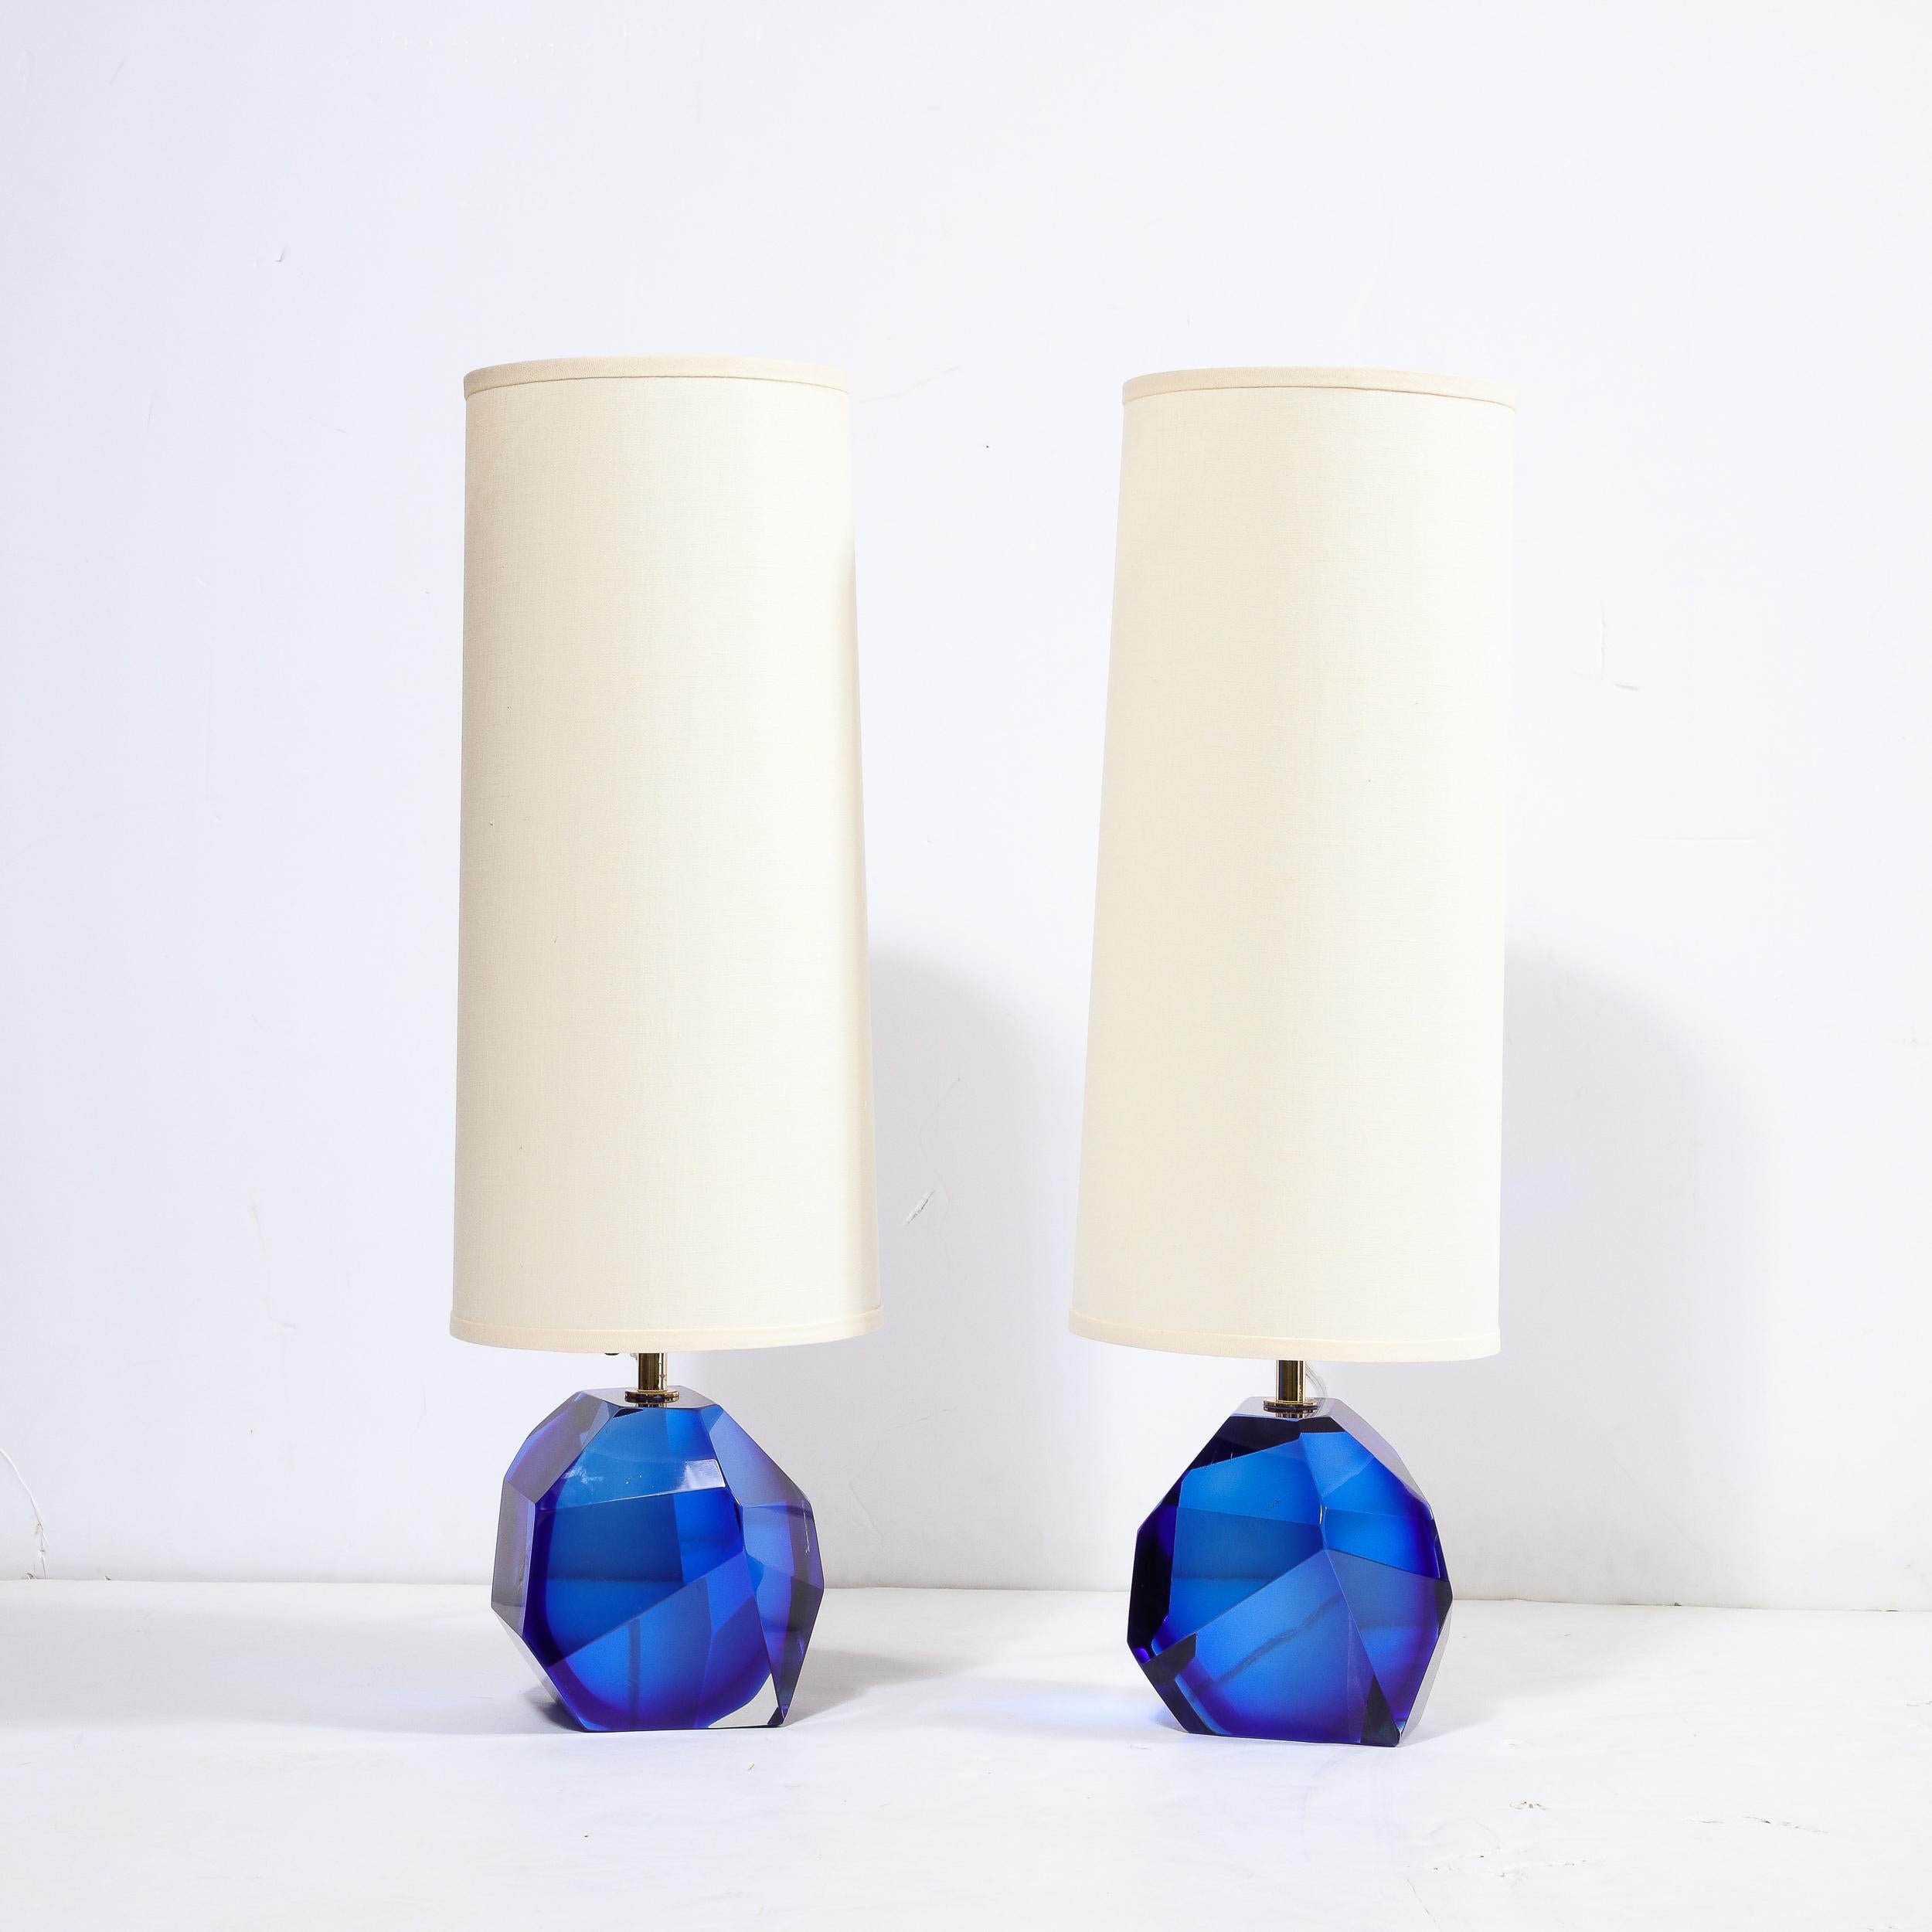 This striking and elegant pair of table lamps were handblown in Murano, Italy- the islands off the coast of Venice renowned for centuries for their superlative glass production. They feature faceted bodies realized in handblown translucent Murano